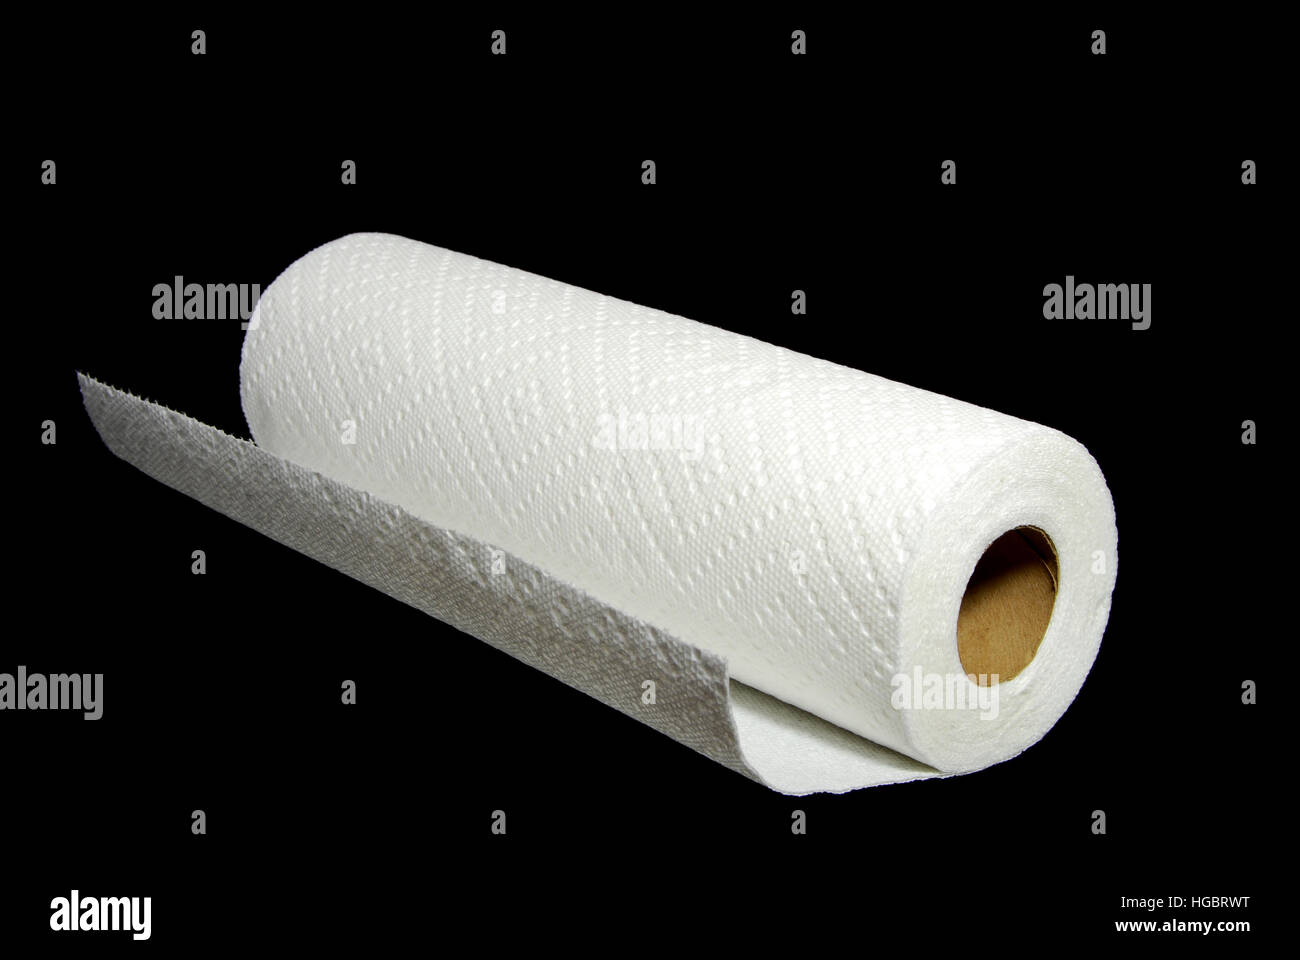 Paper towel roll isolated on a black background. Stock Photo